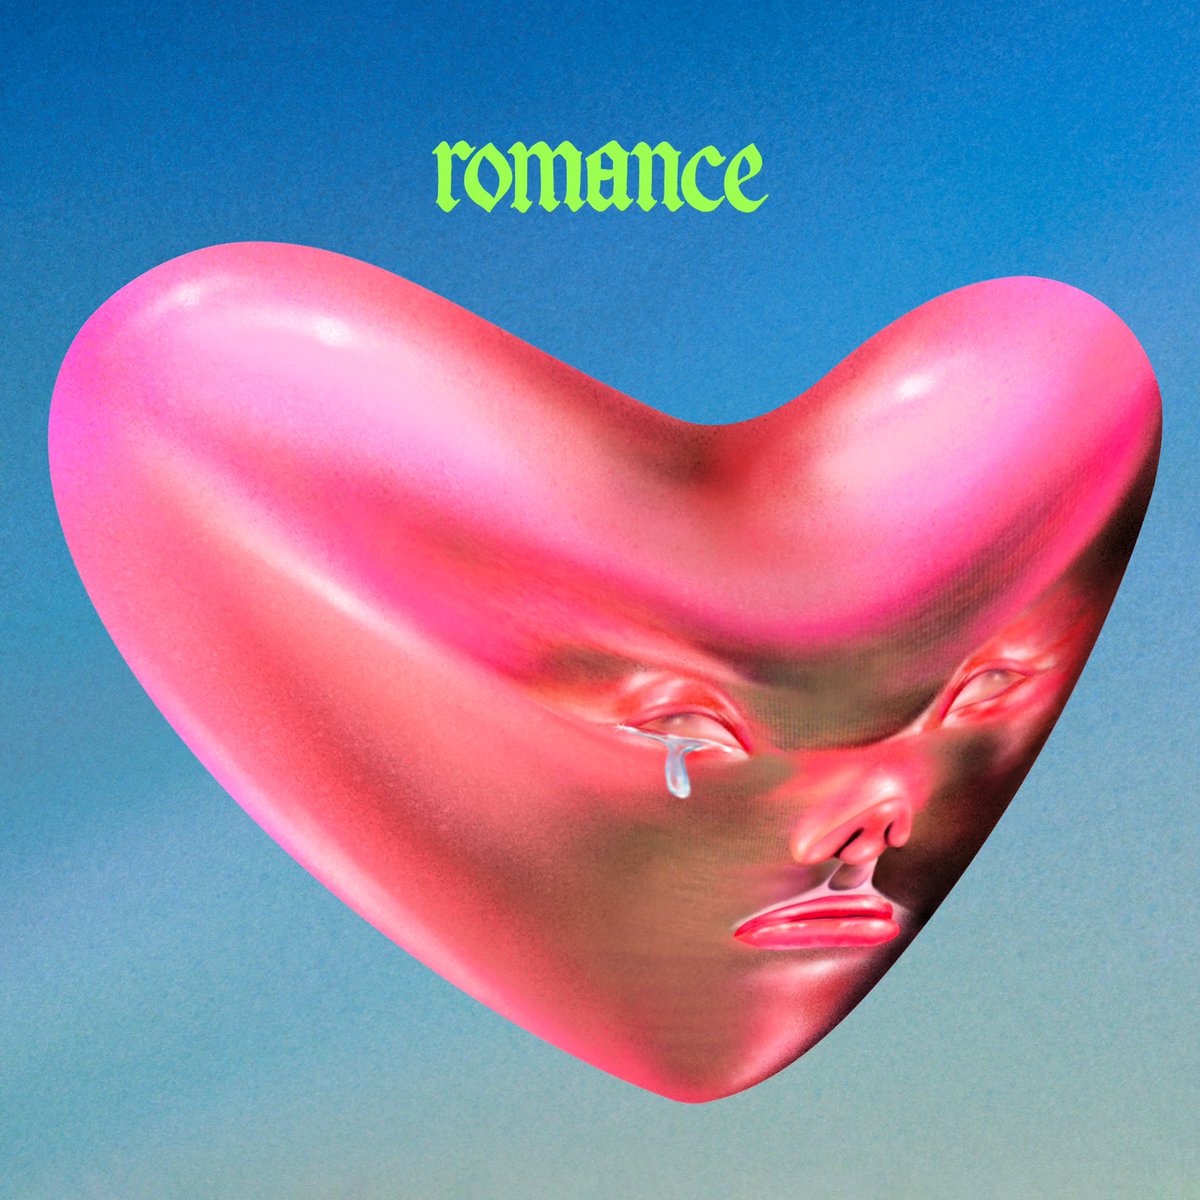 Our new album ROMANCE is out 23 August 2024 and new single Starburster is out now. You can pre order it now and if you order from the official UK/Ireland store you’ll get pre-sale access to a soon to be announced tour fontainesdc.x-l.co/romance